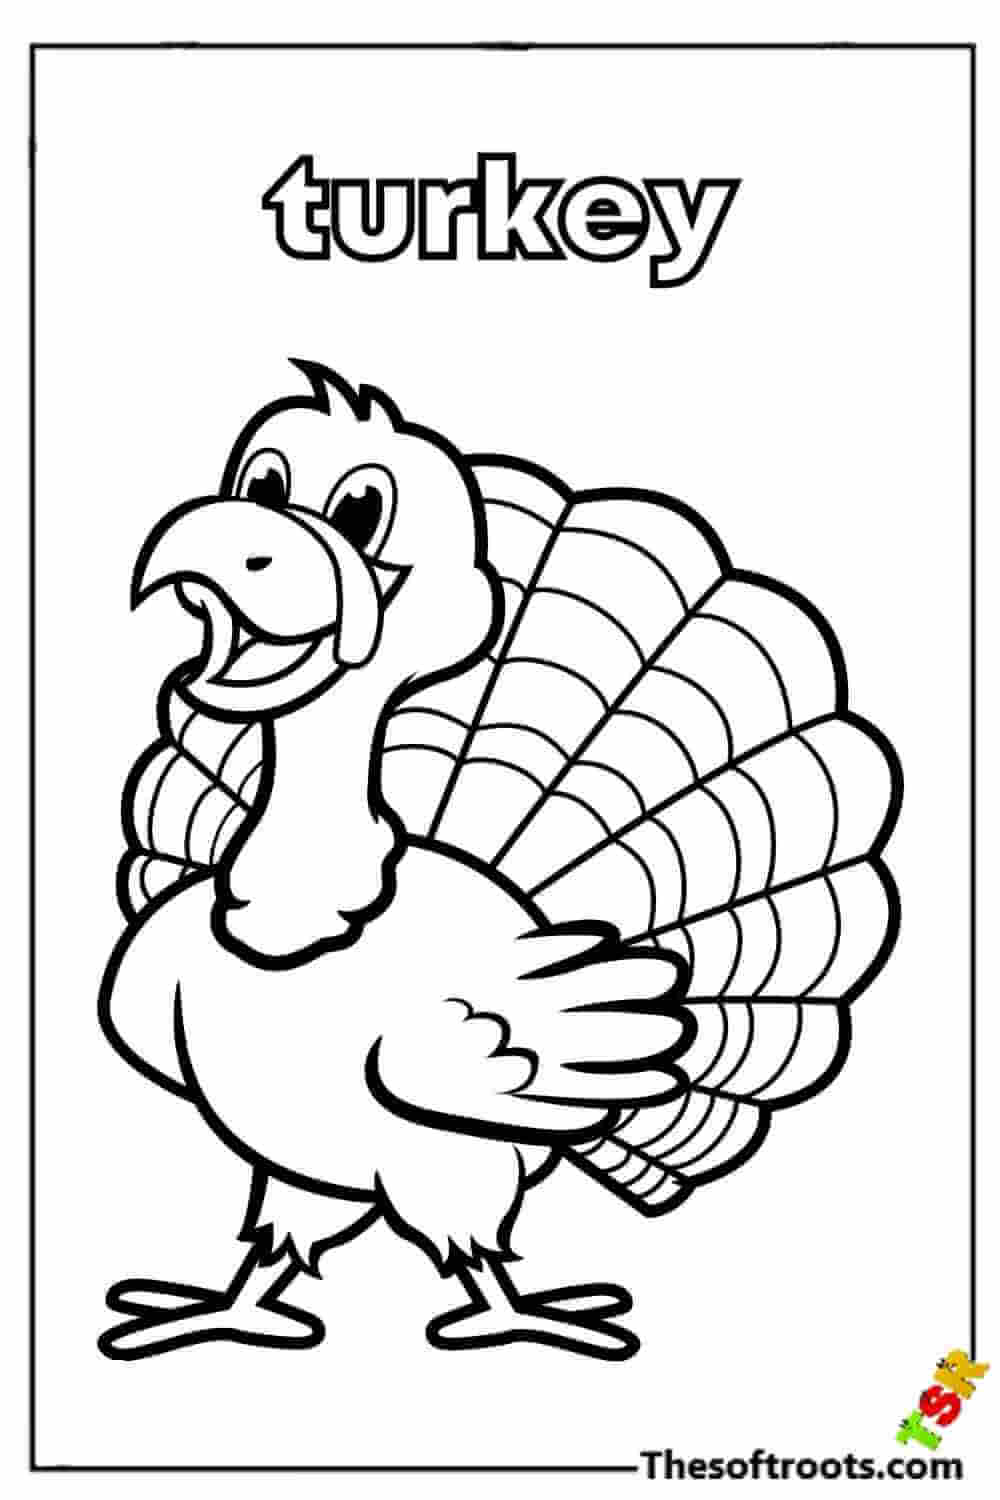 Detailed turkey coloring pages